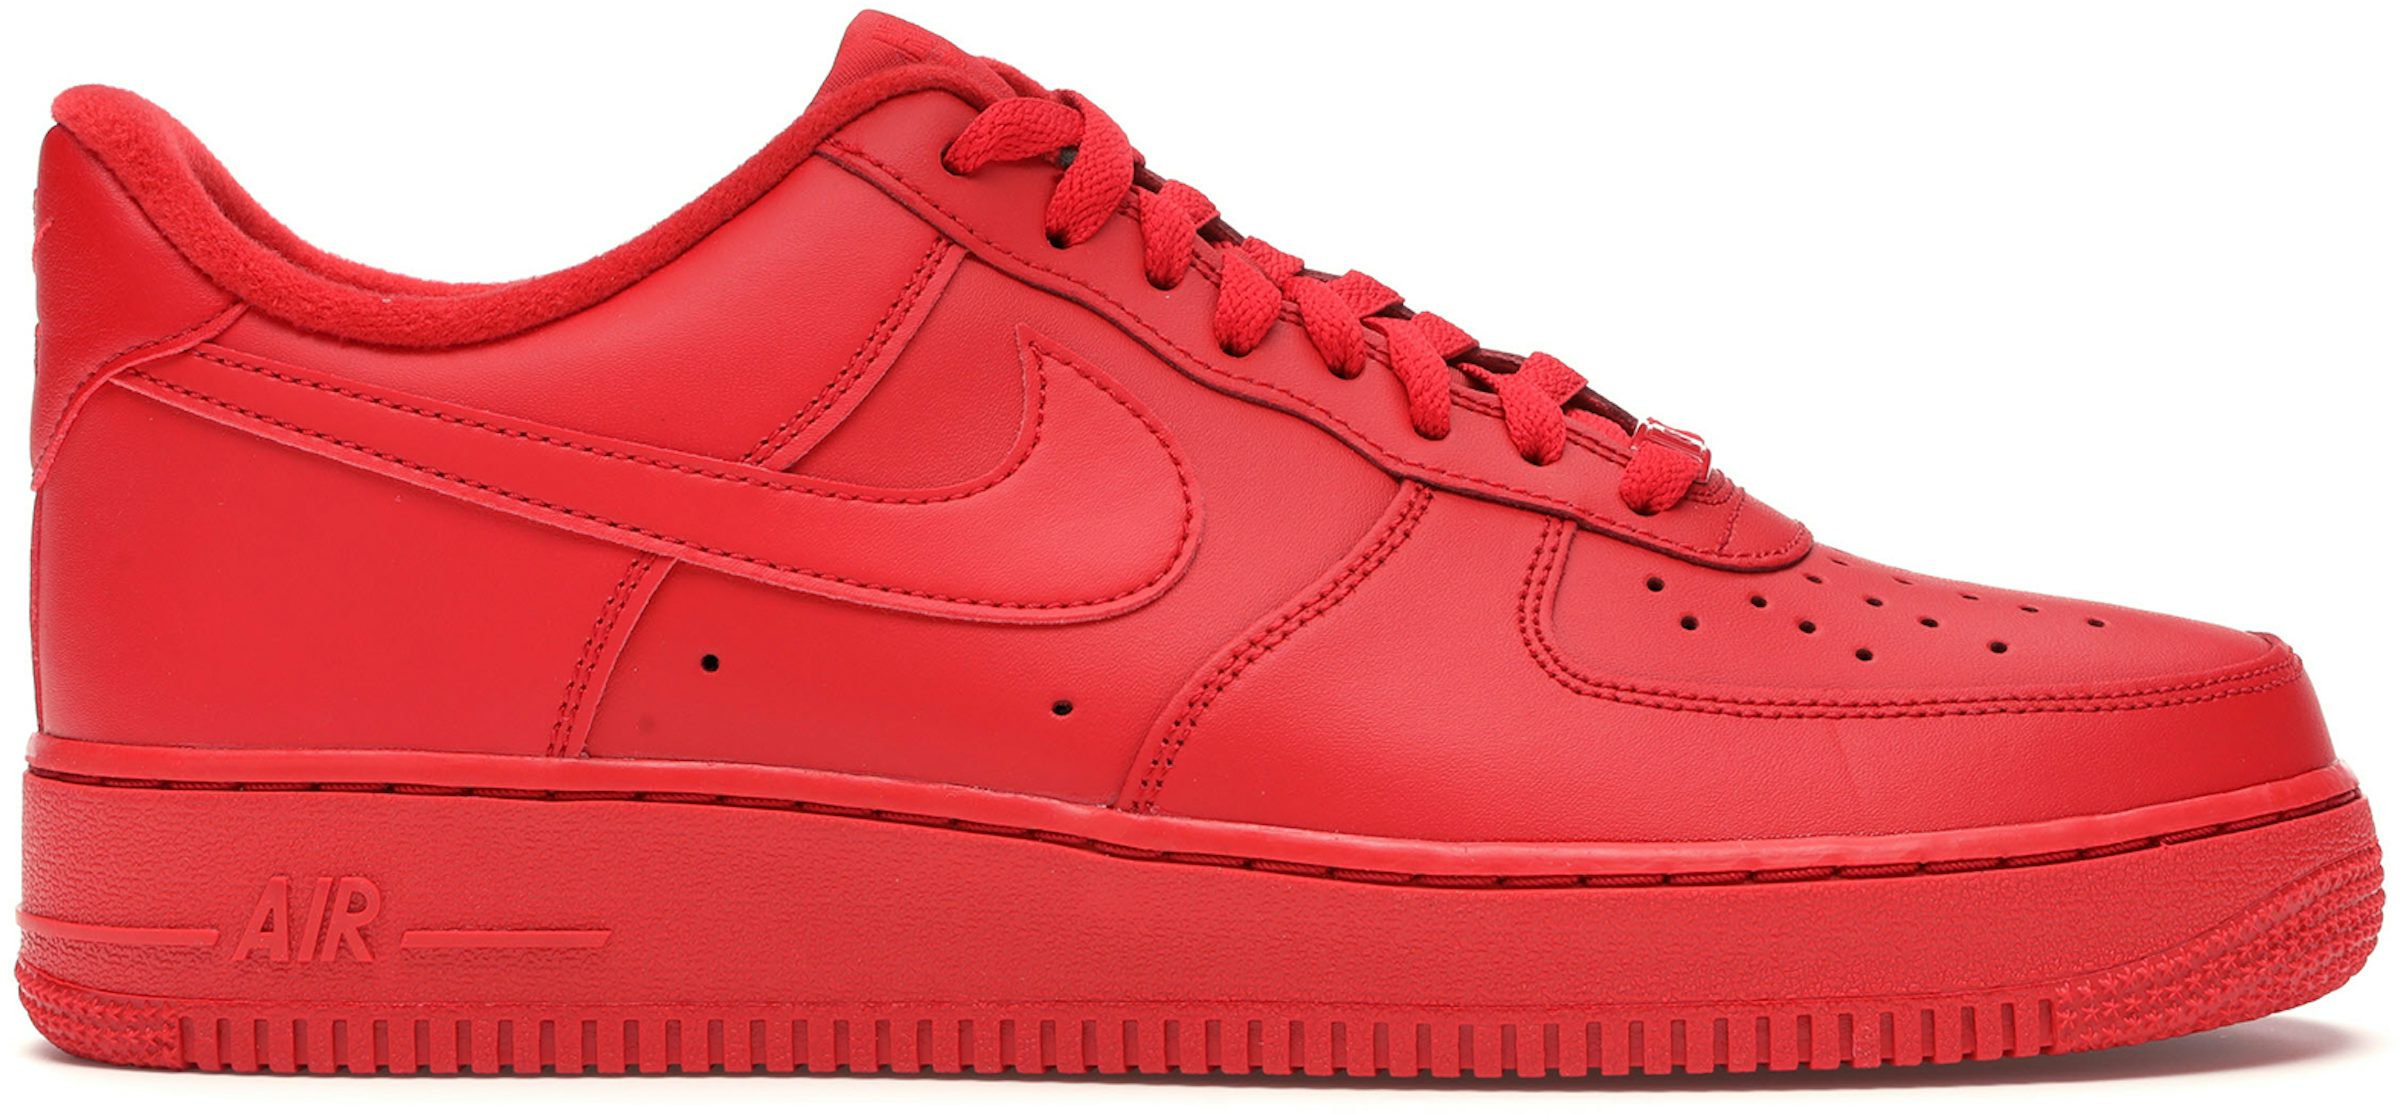 How To Wear Nike Air Force 1s : 19 Outfit Ideas